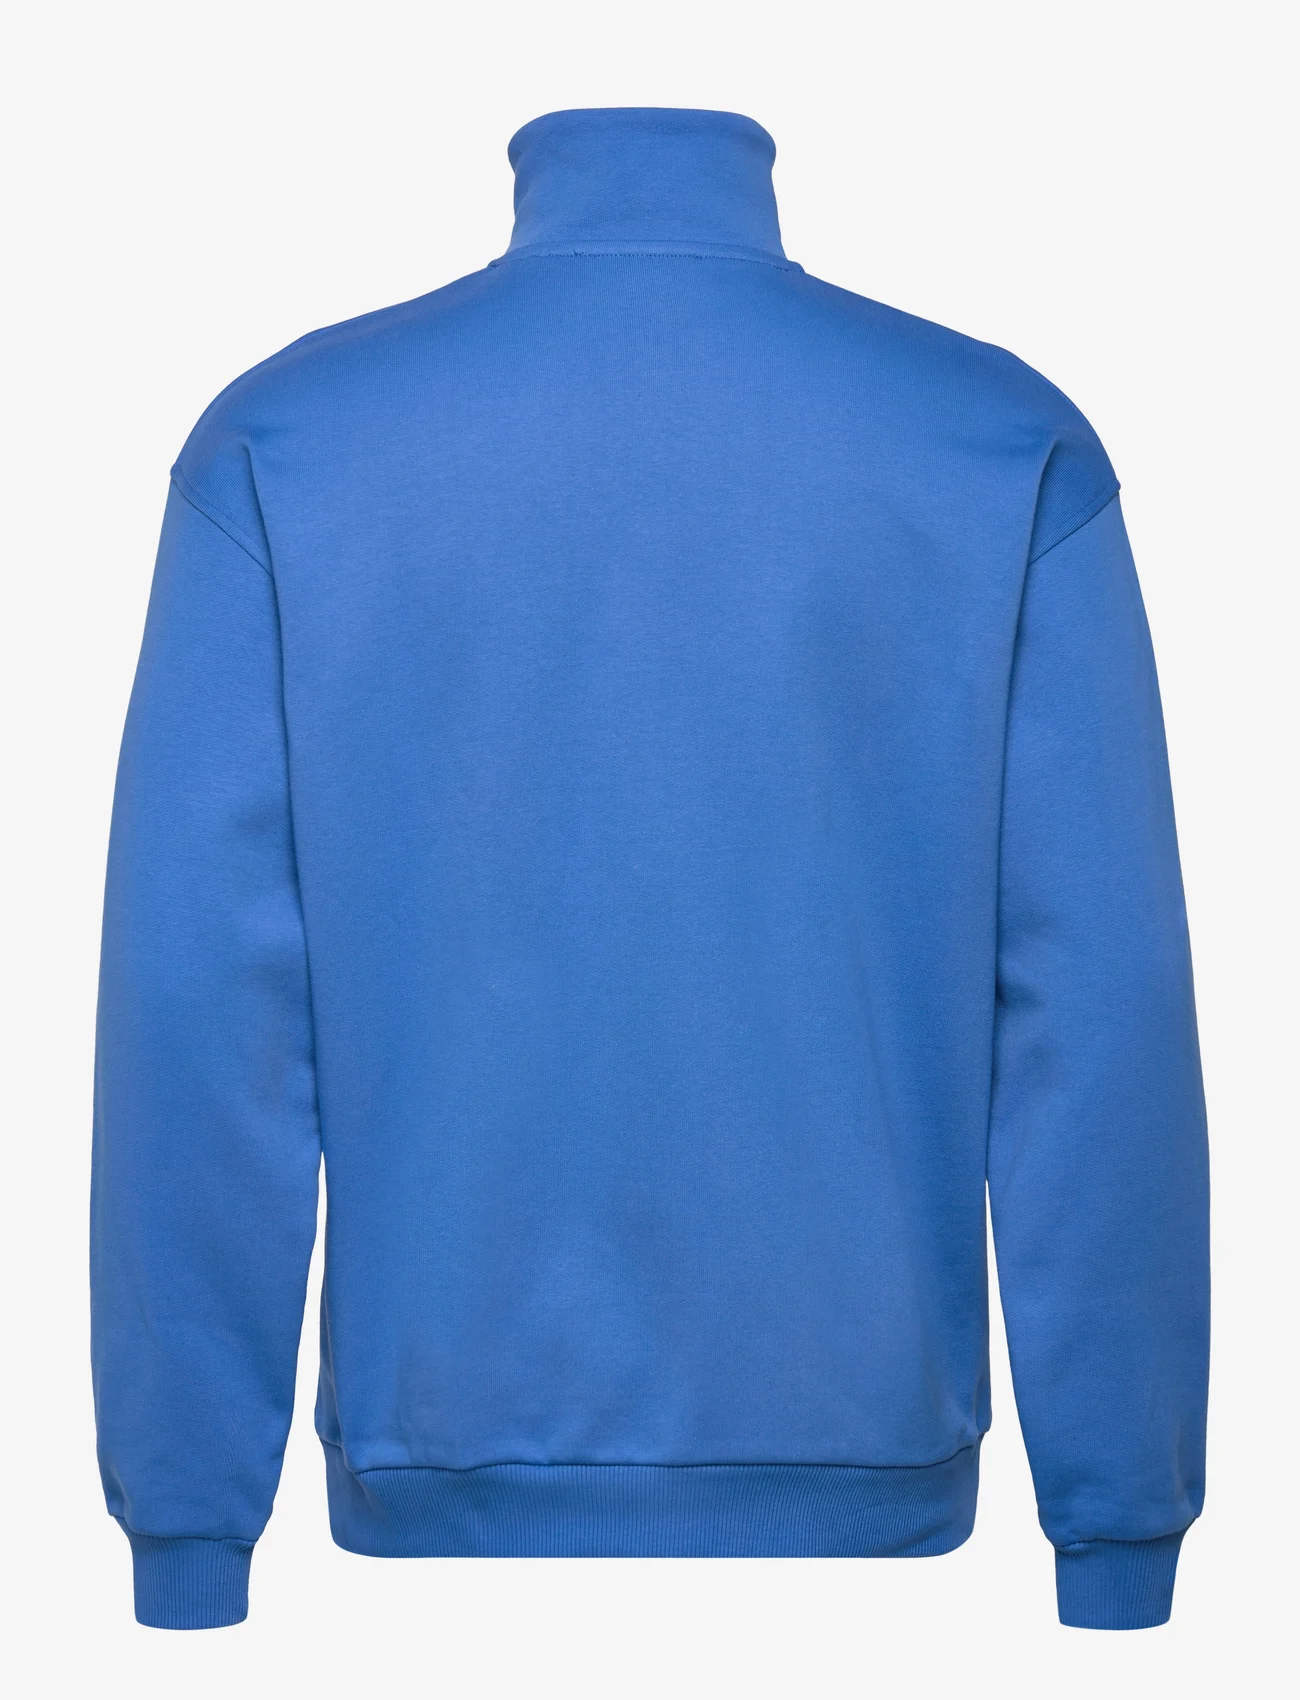 Les Deux - French Sweatshit - swetry - palace blue - 1